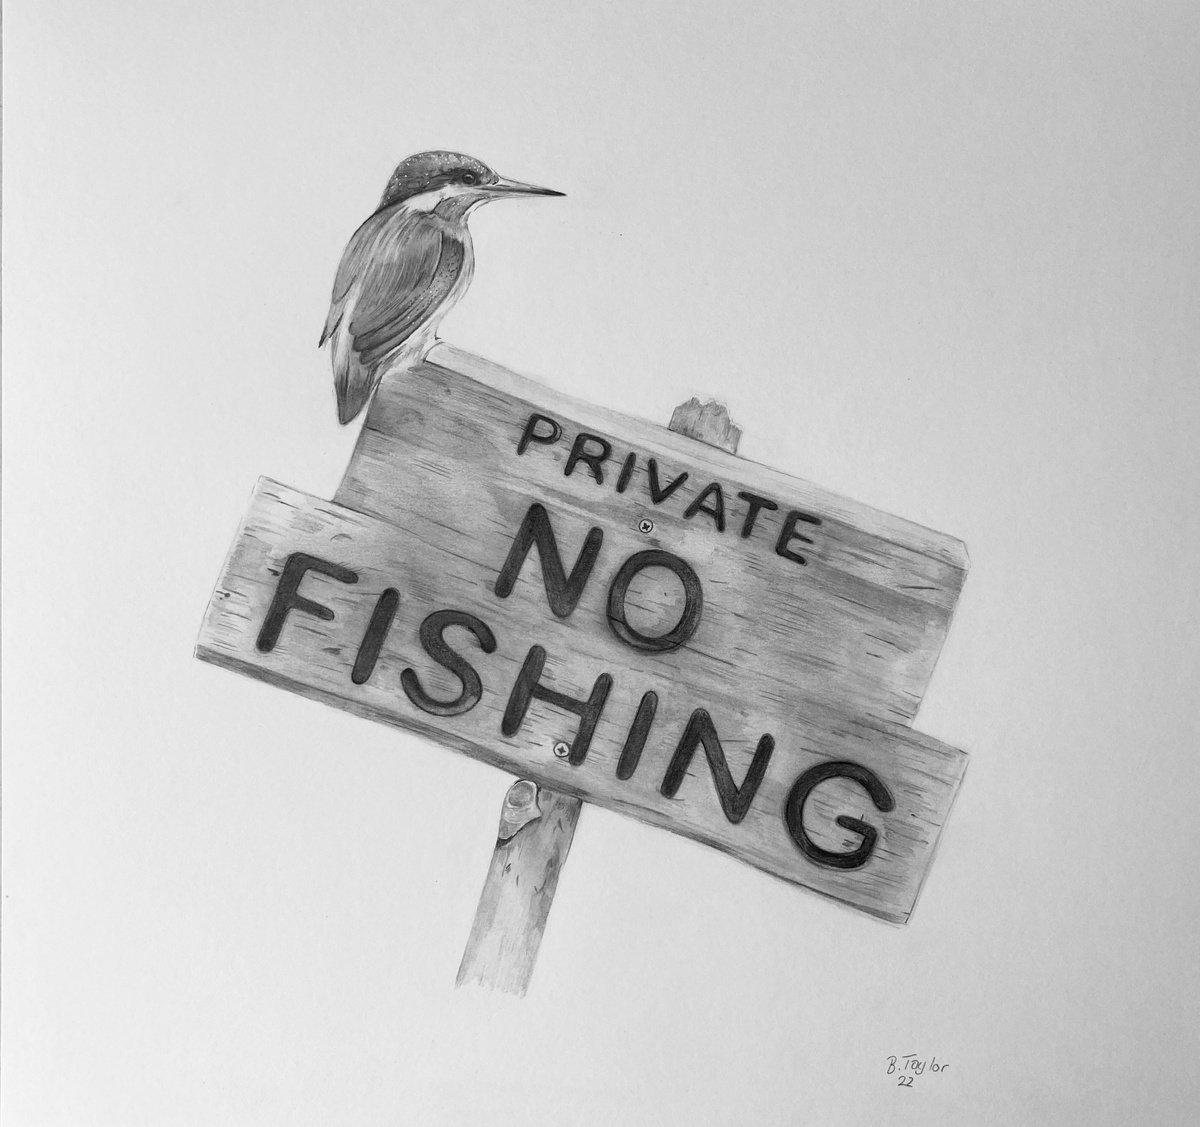 Private, no fishing by Bethany Taylor